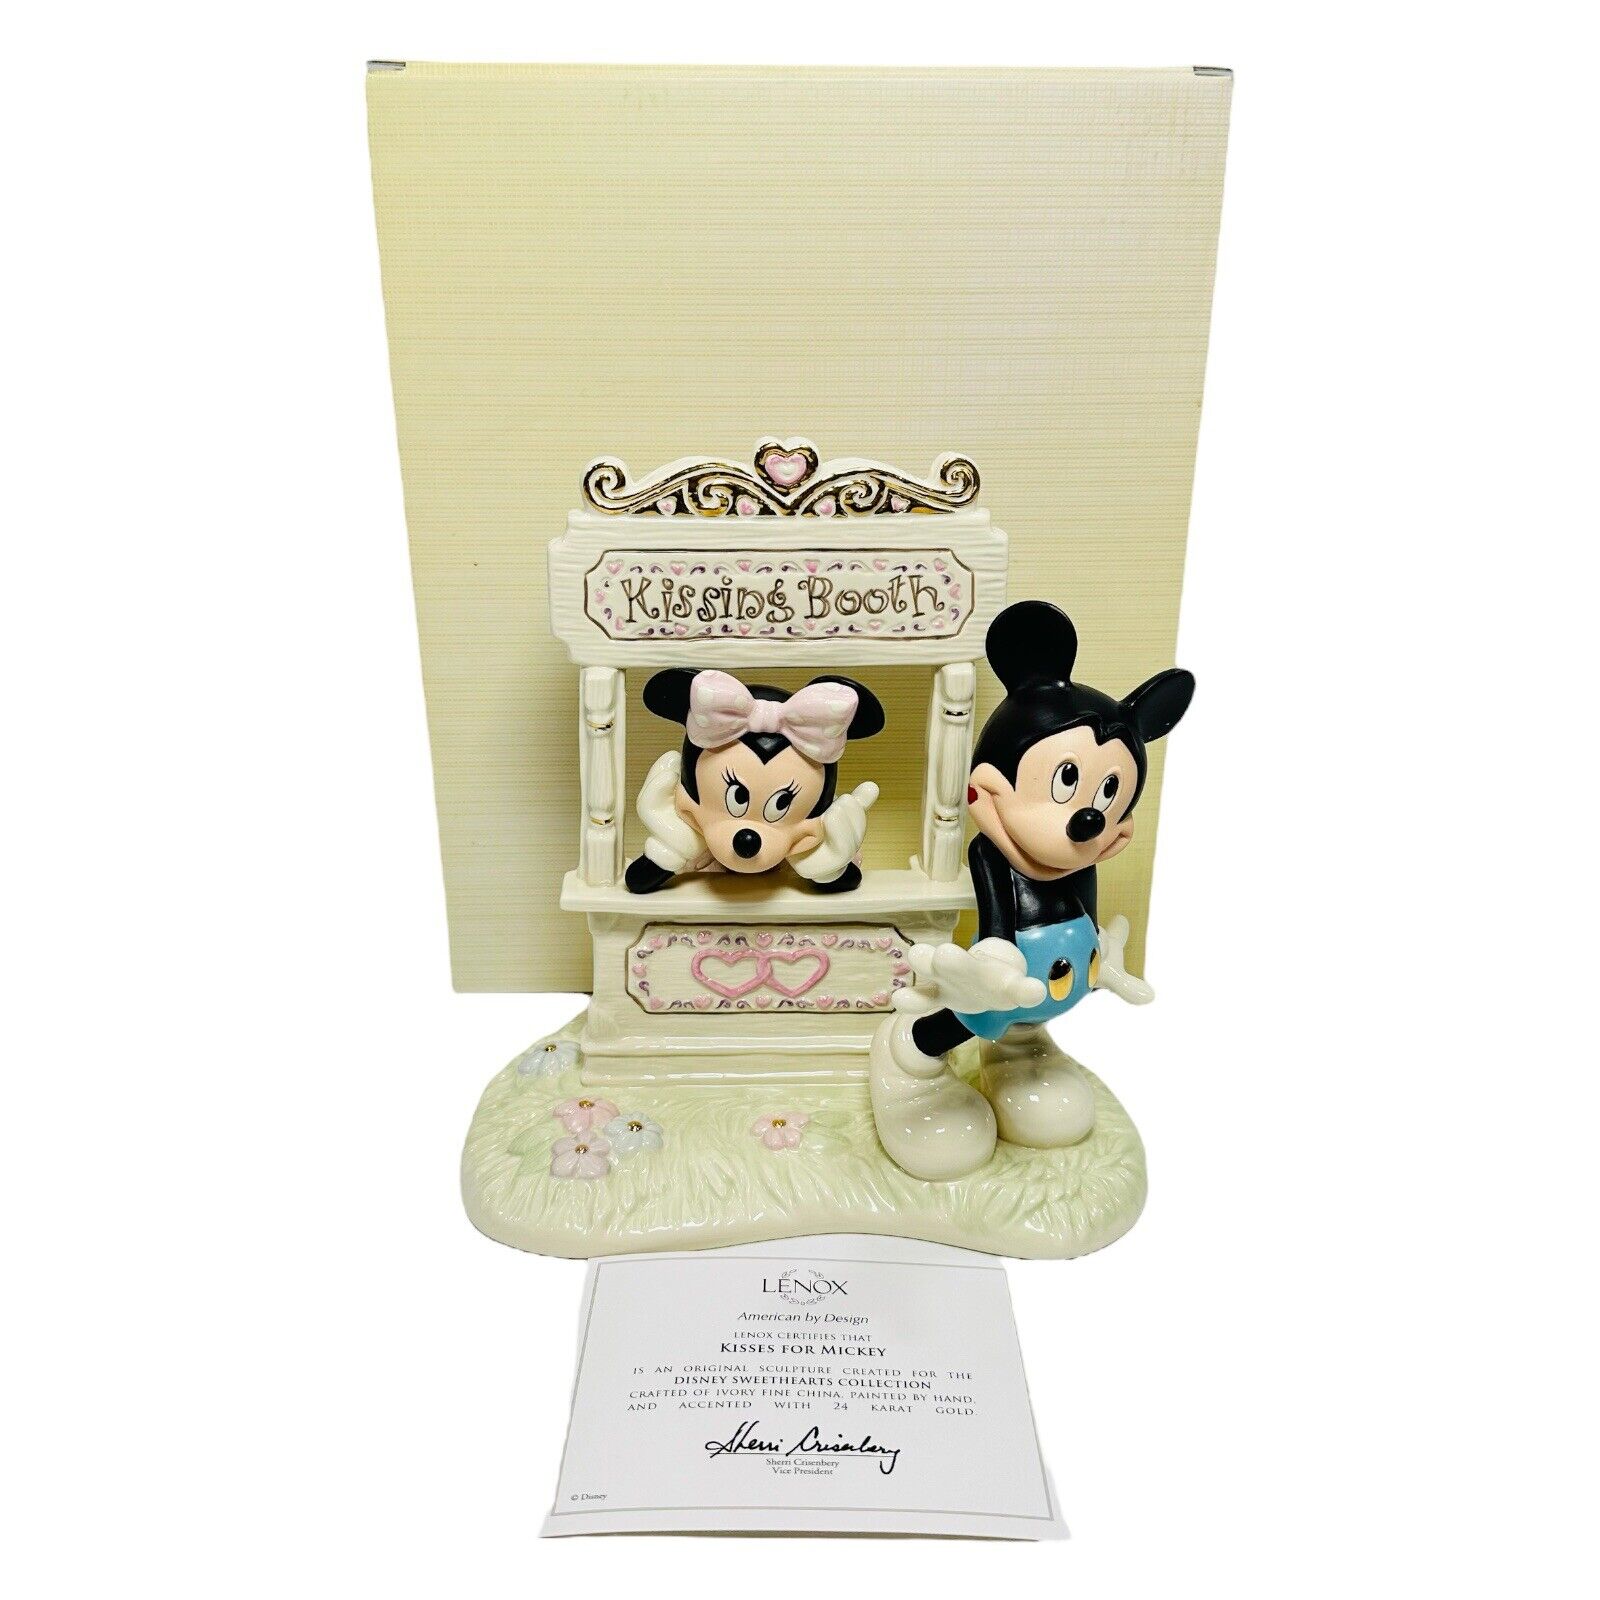 Lenox Disney Kisses for Mickey Minnie Mouse at Kissing Booth New in Box COA